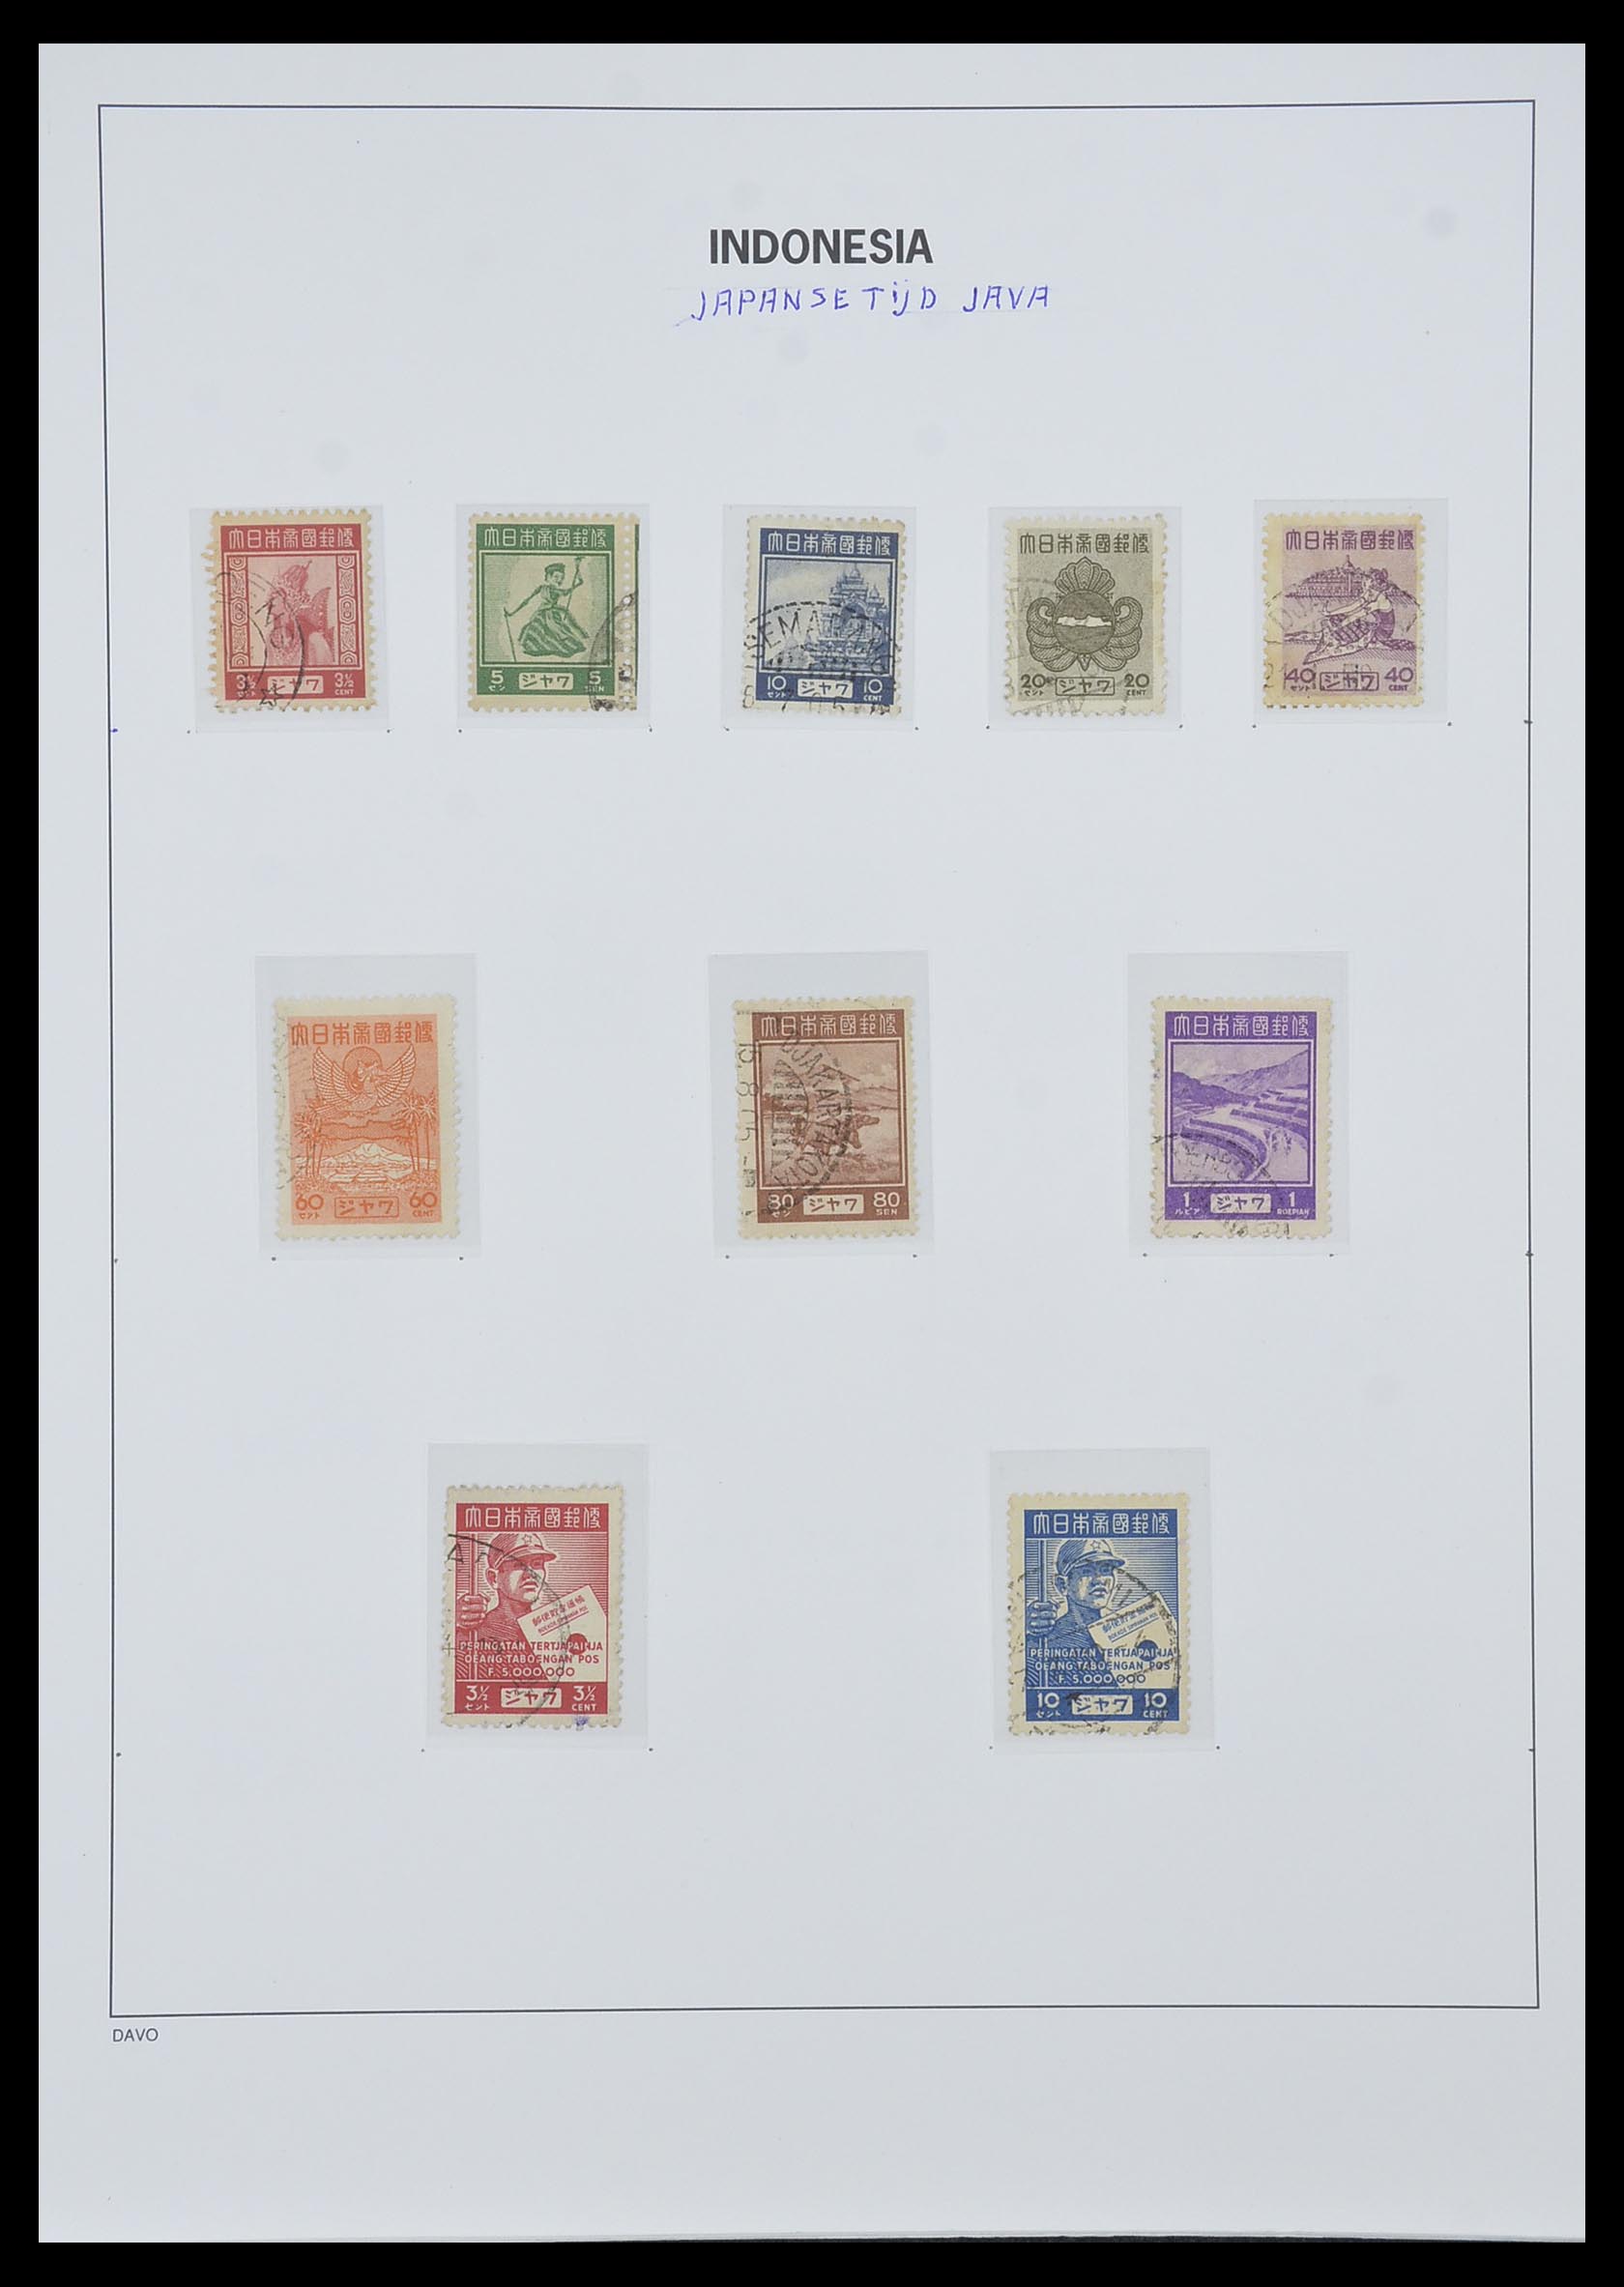 33988 003 - Stamp collection 33988 Vienna printings Indonesia.